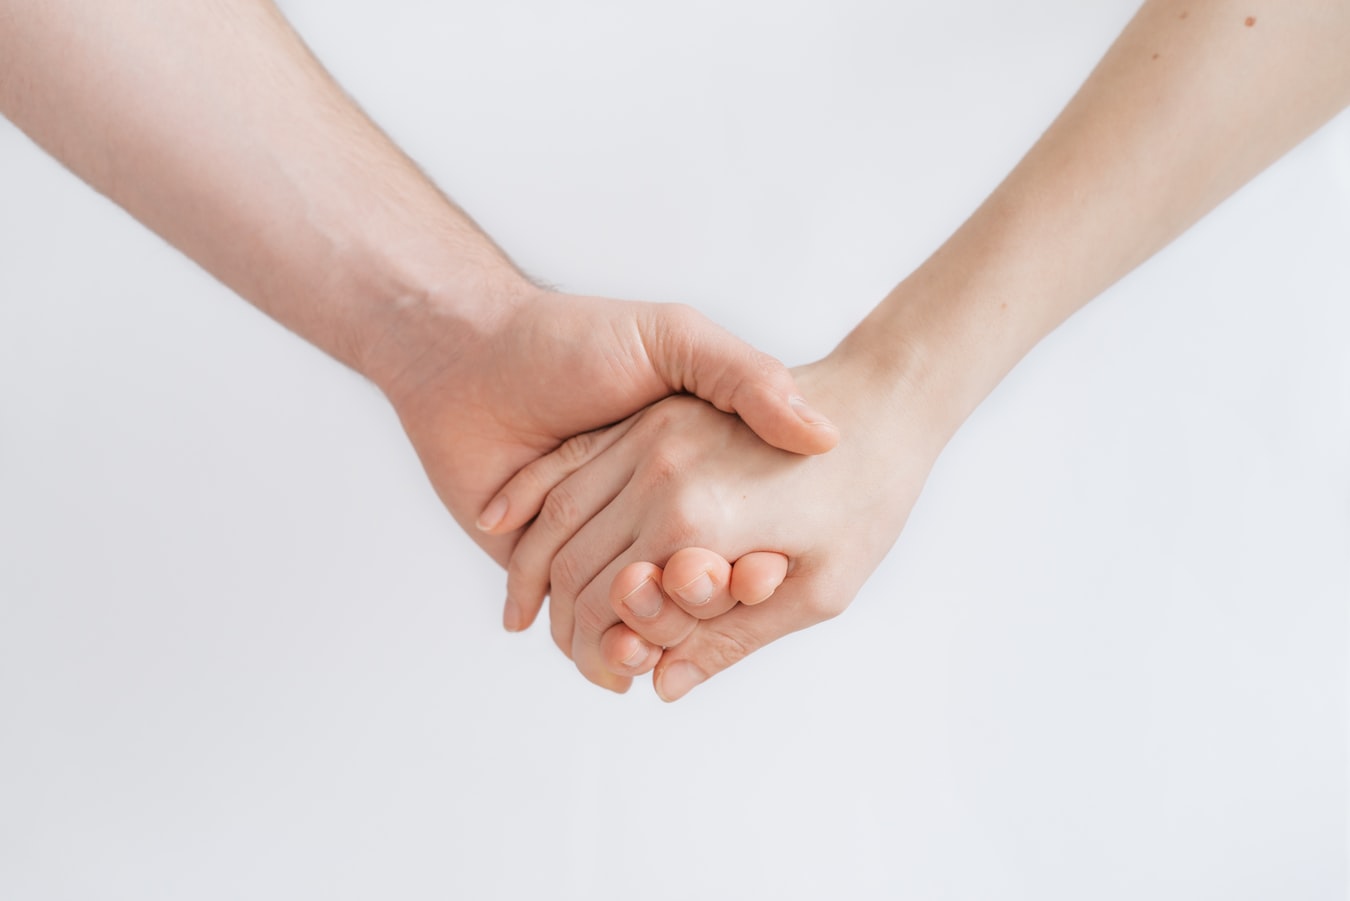 An individual holding their loved ones hand as a sign of support